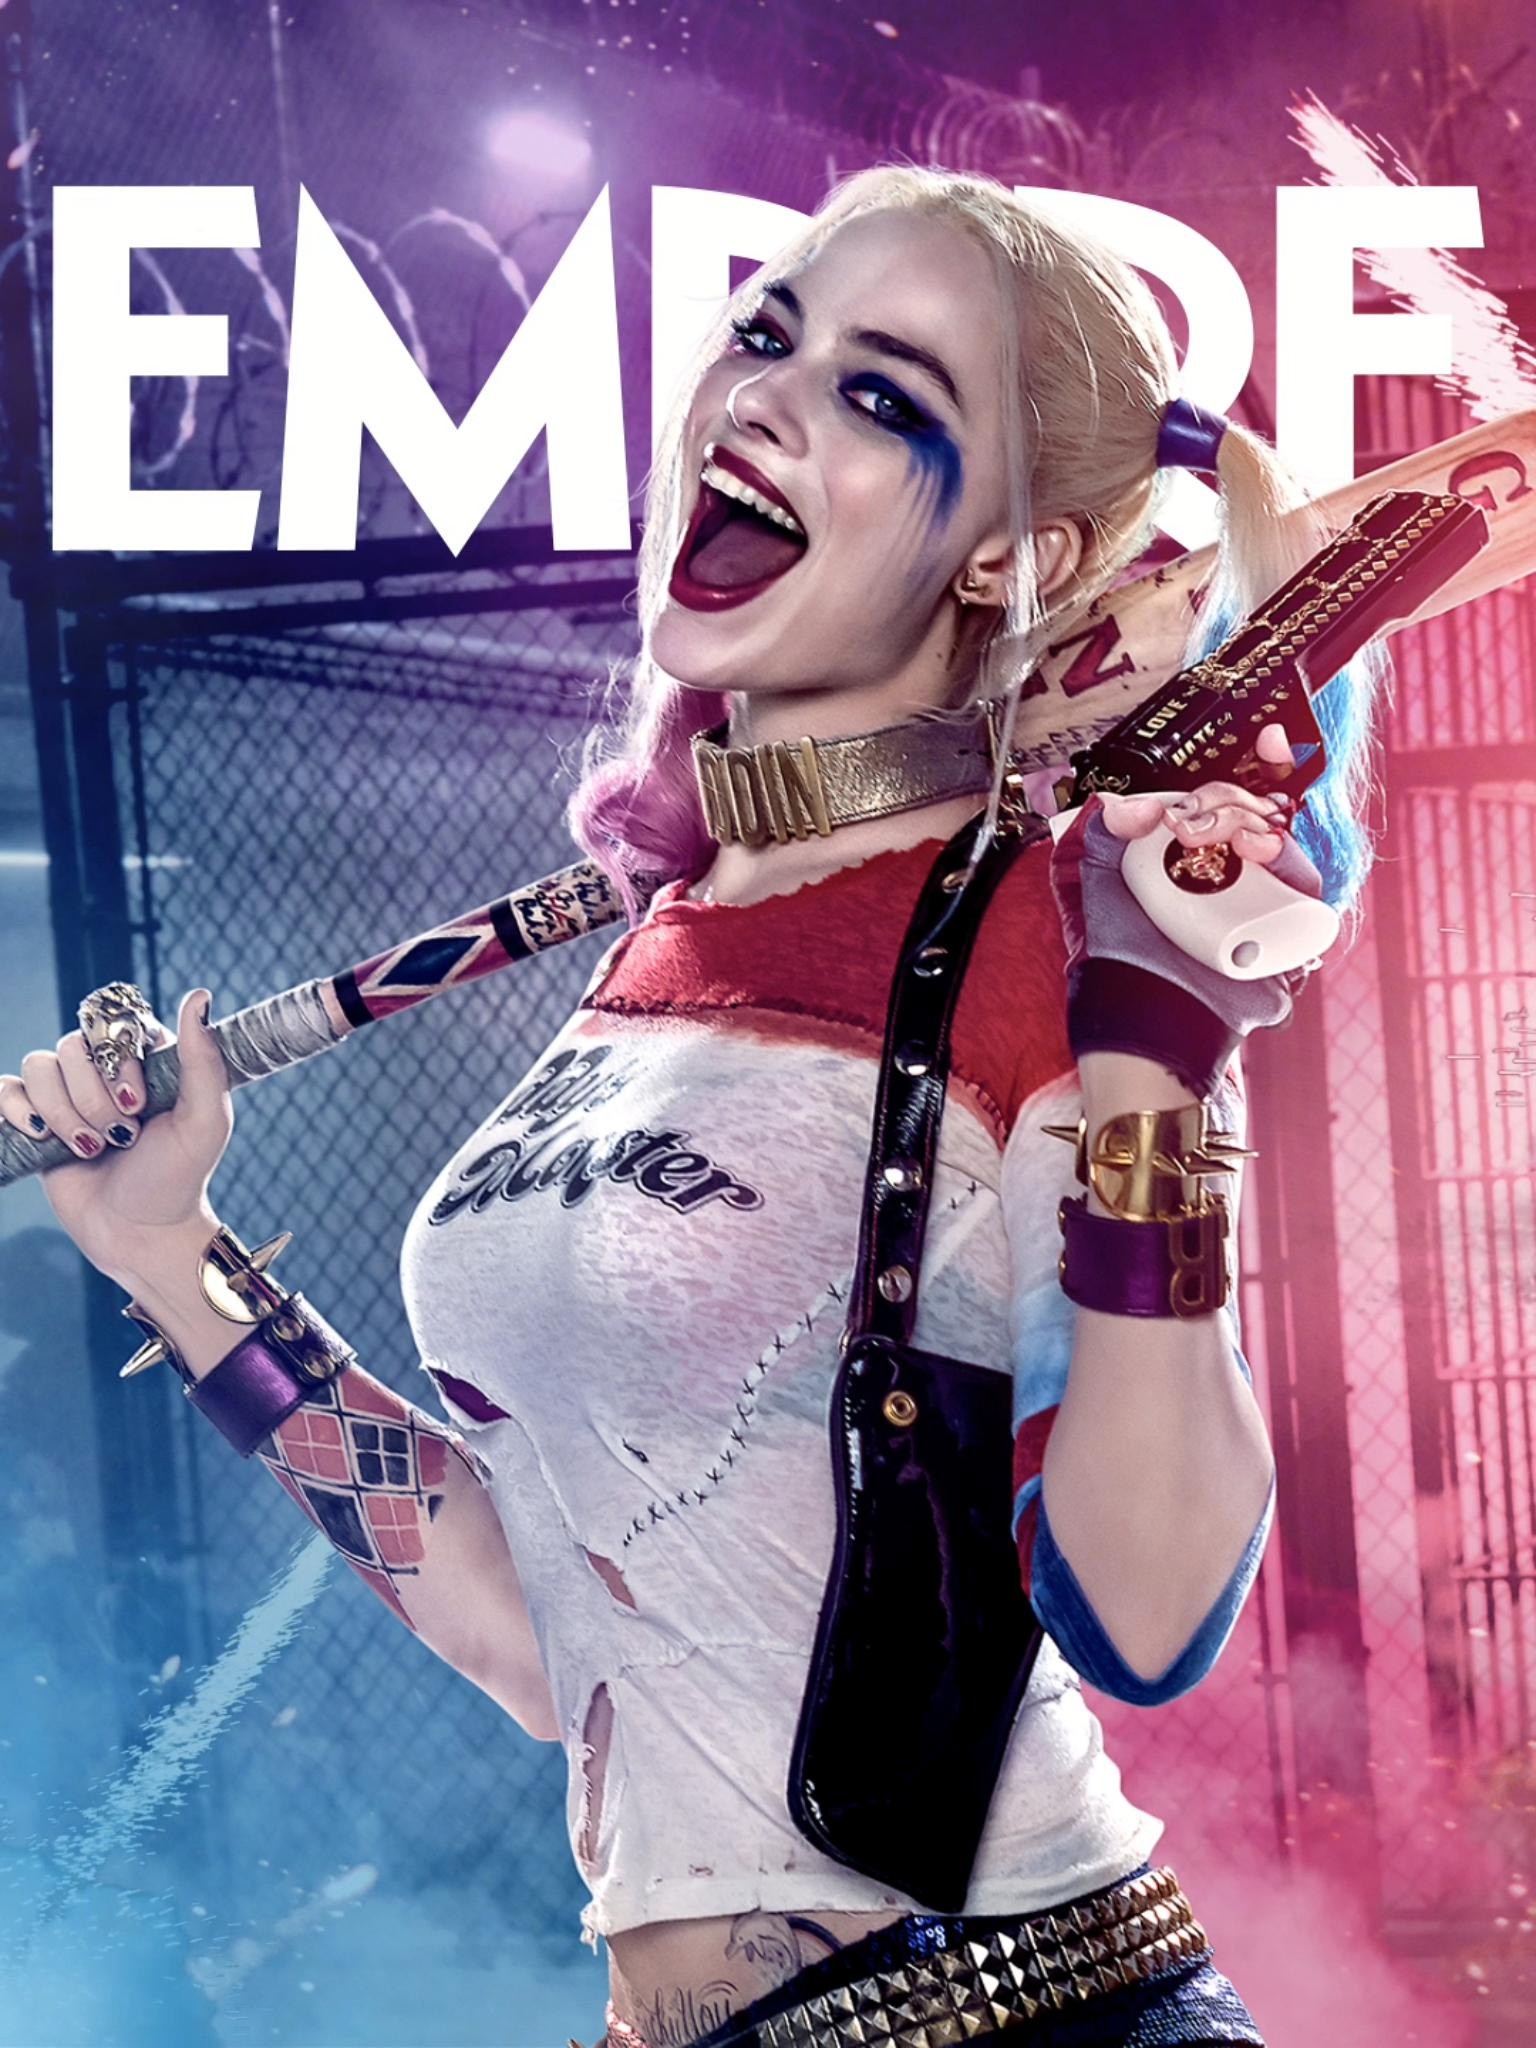 People 1536x2048 Suicide Squad Harley Quinn Margot Robbie DC Comics women girls with guns baseball bat open mouth gun weapon inked girls makeup looking at viewer red lipstick painted nails movie poster